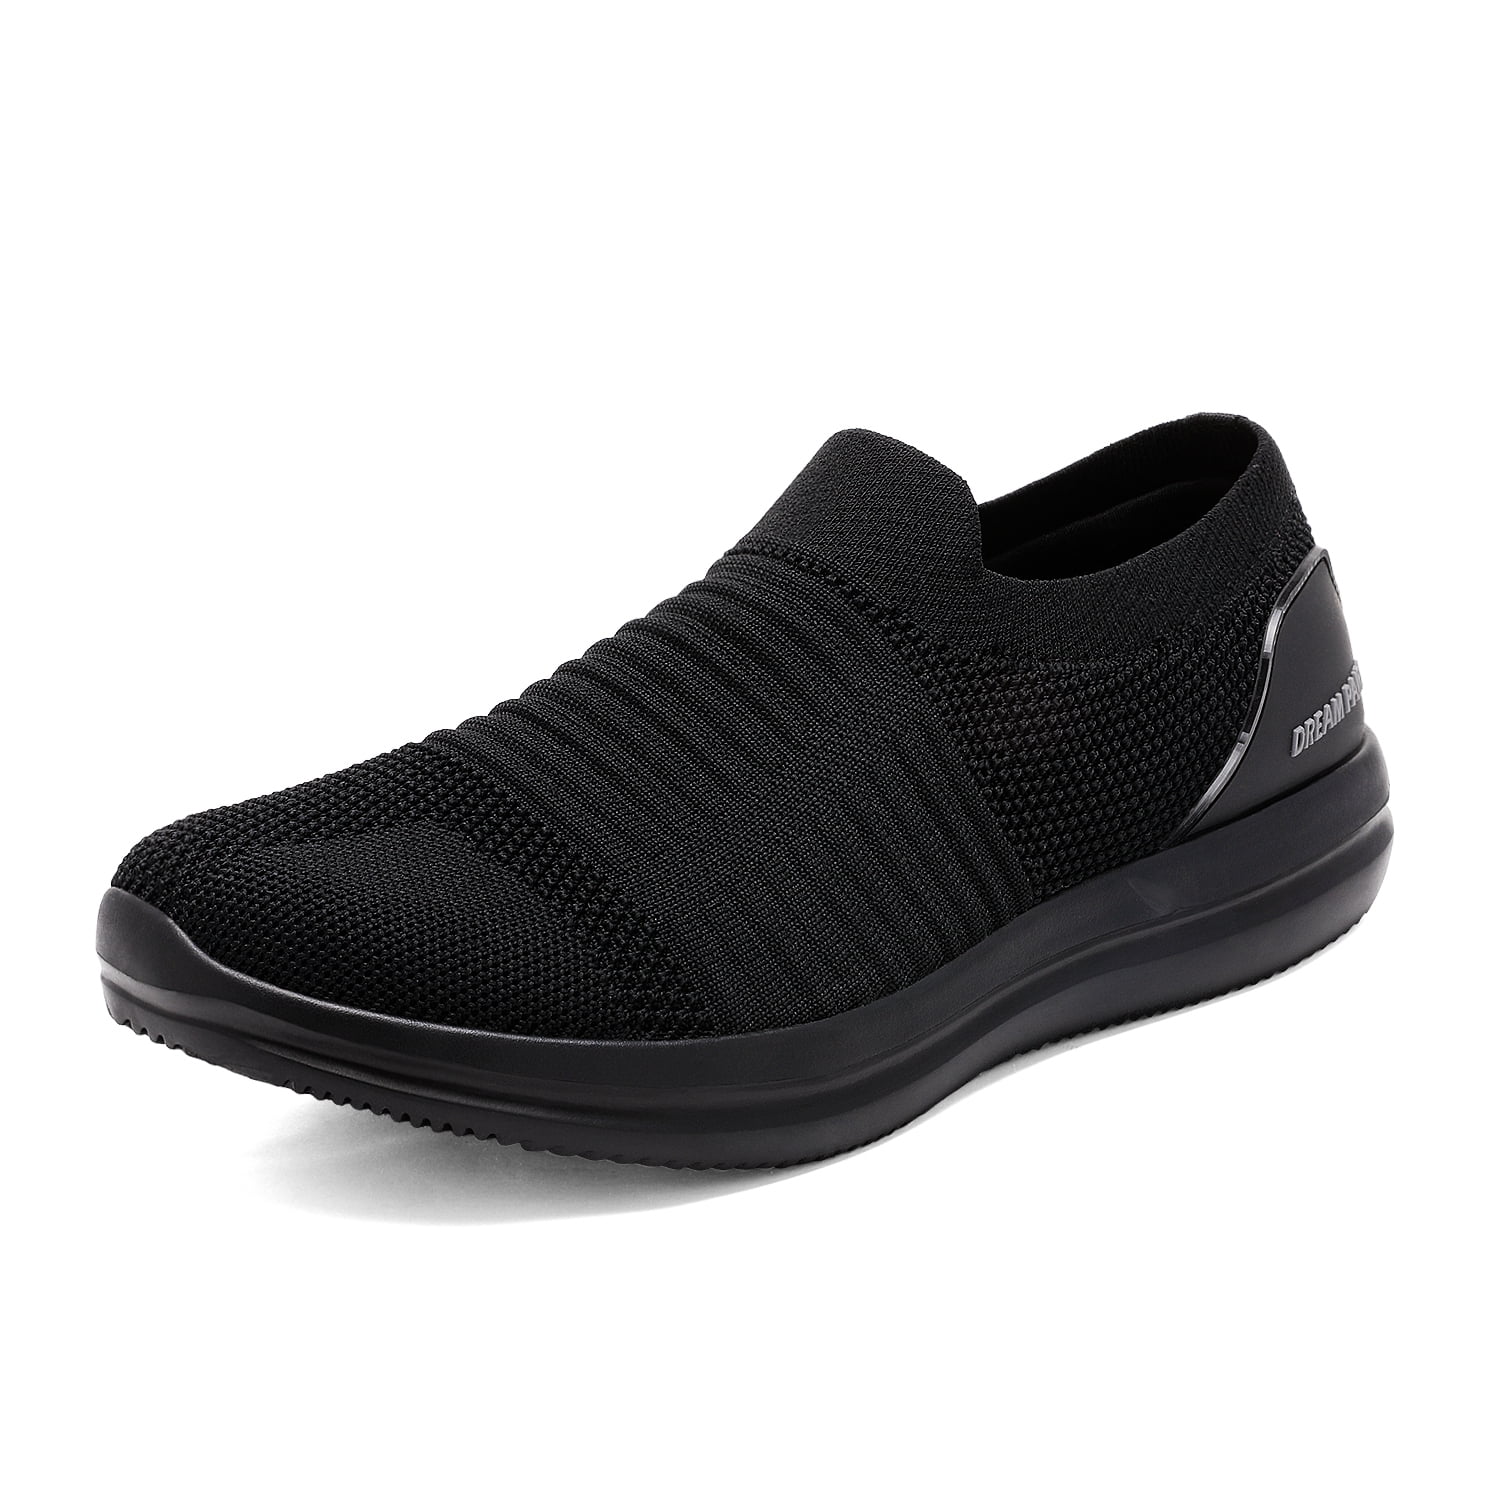 DREAM PAIRS Men's Slip On Loafer Shoes Walking Shoes Sneakers CADMAN ...